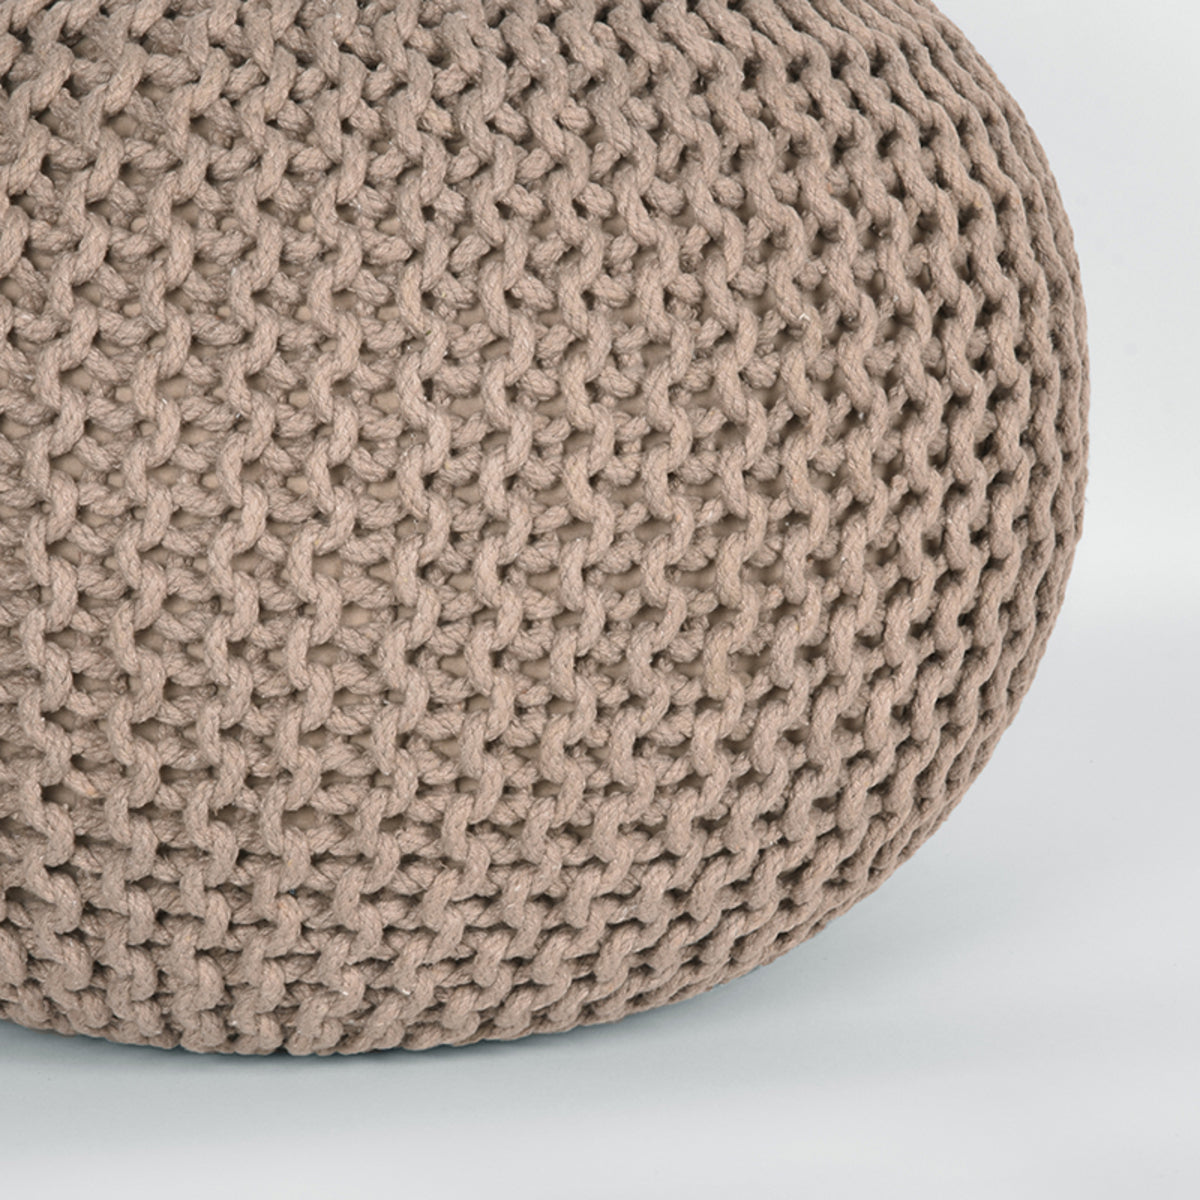 LABEL51 Pouf Knitted - Beige - Cotton - M